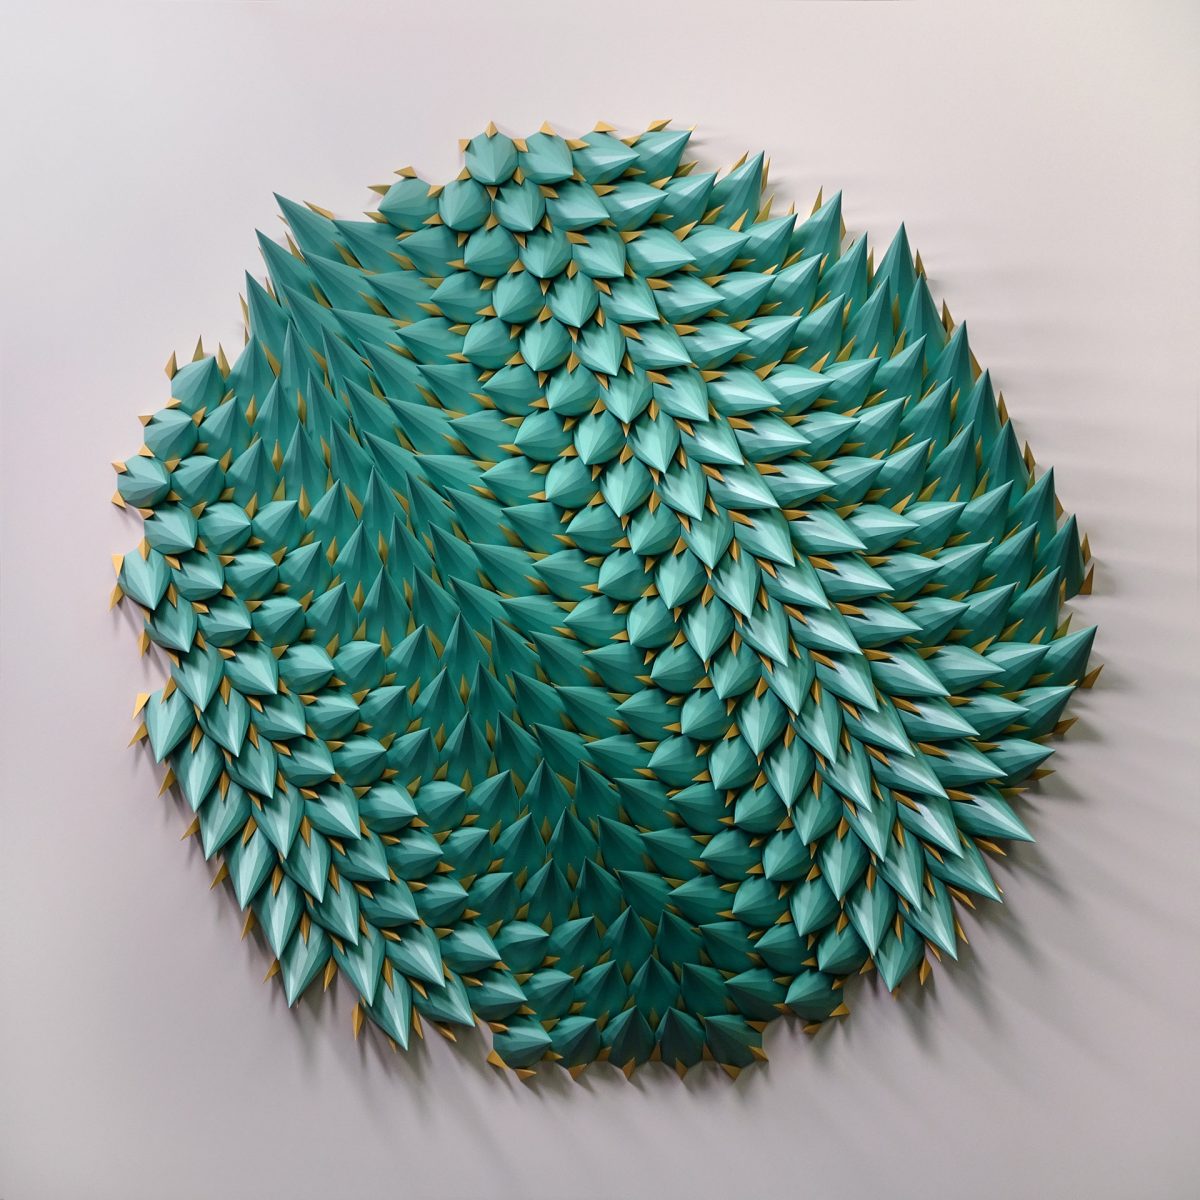 shlian, unholy 227 we used to do the things we used to do, 2020, 48 x 48 x 3 contemporary art shop online